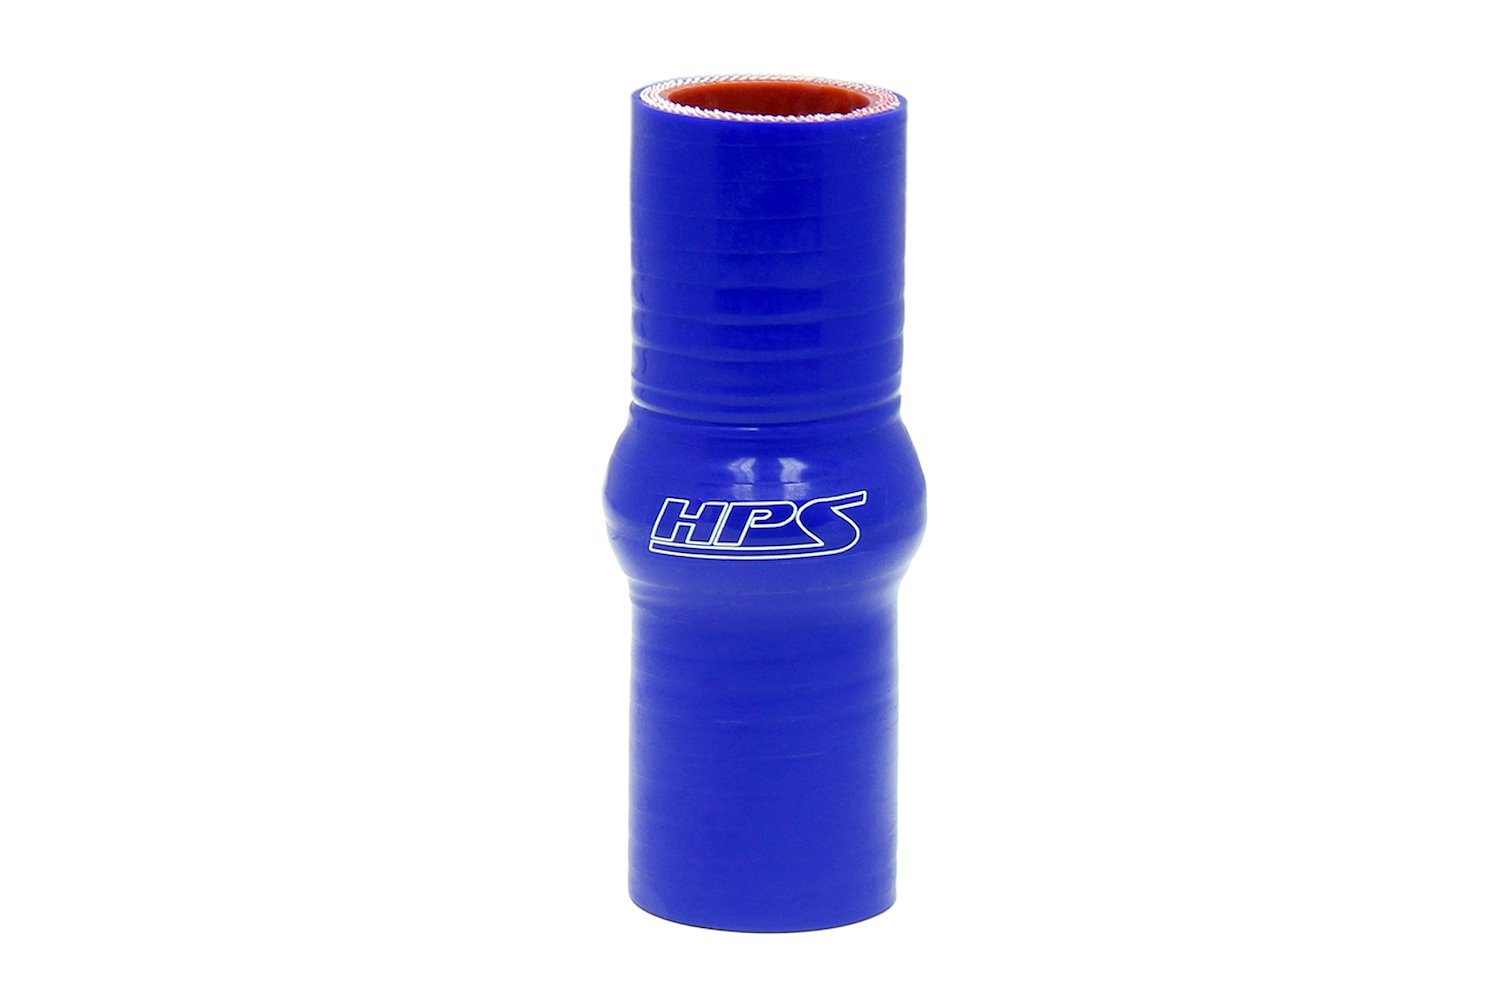 HTSHC-187-L4-BLUE Silicone Hump Coupler, High-Temp 4-Ply Reinforced, 1 7/8 in. ID, 4 in. Length.